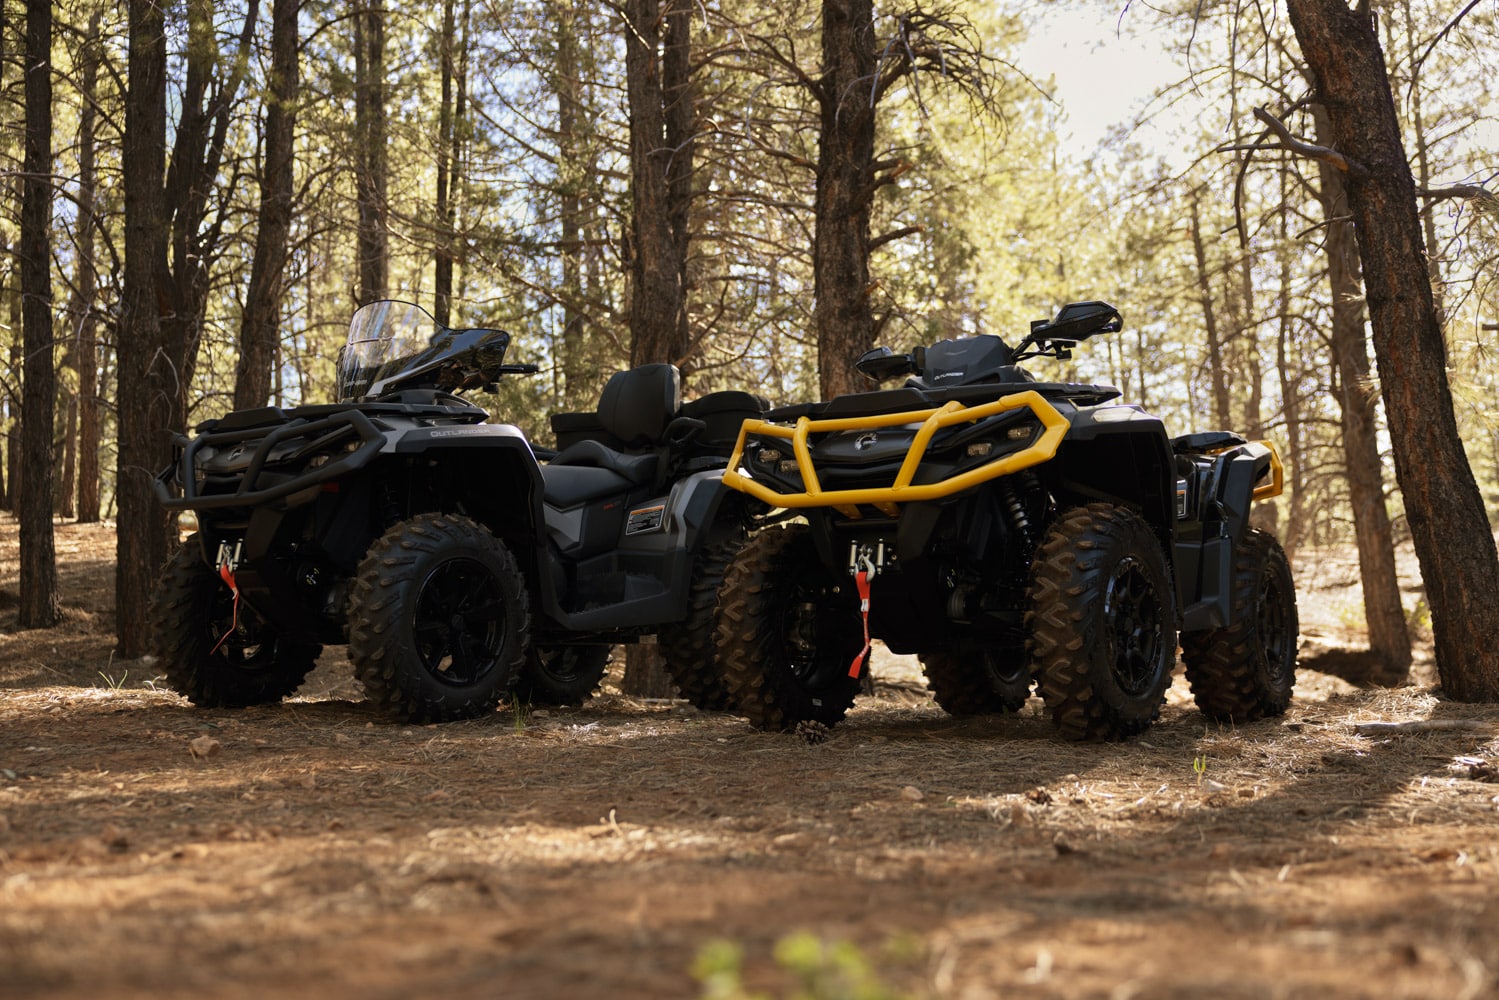 continues to redefine what the ultimate rider experience can be across its powersports product lines